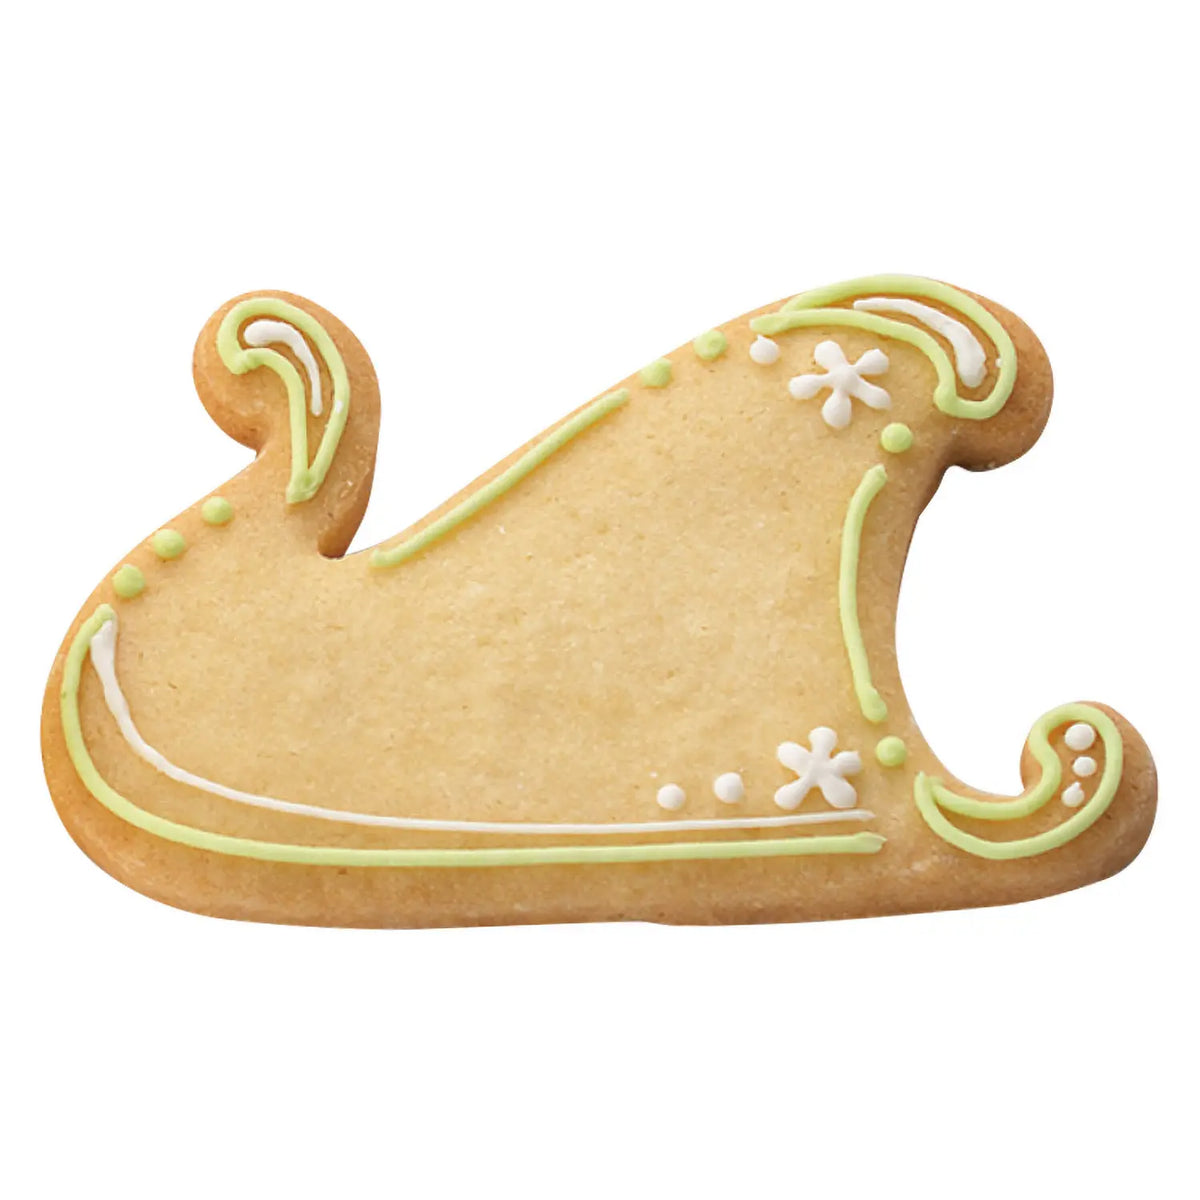 TIGERCROWN Cake Land ABS Resin Cookie Cutter Swan